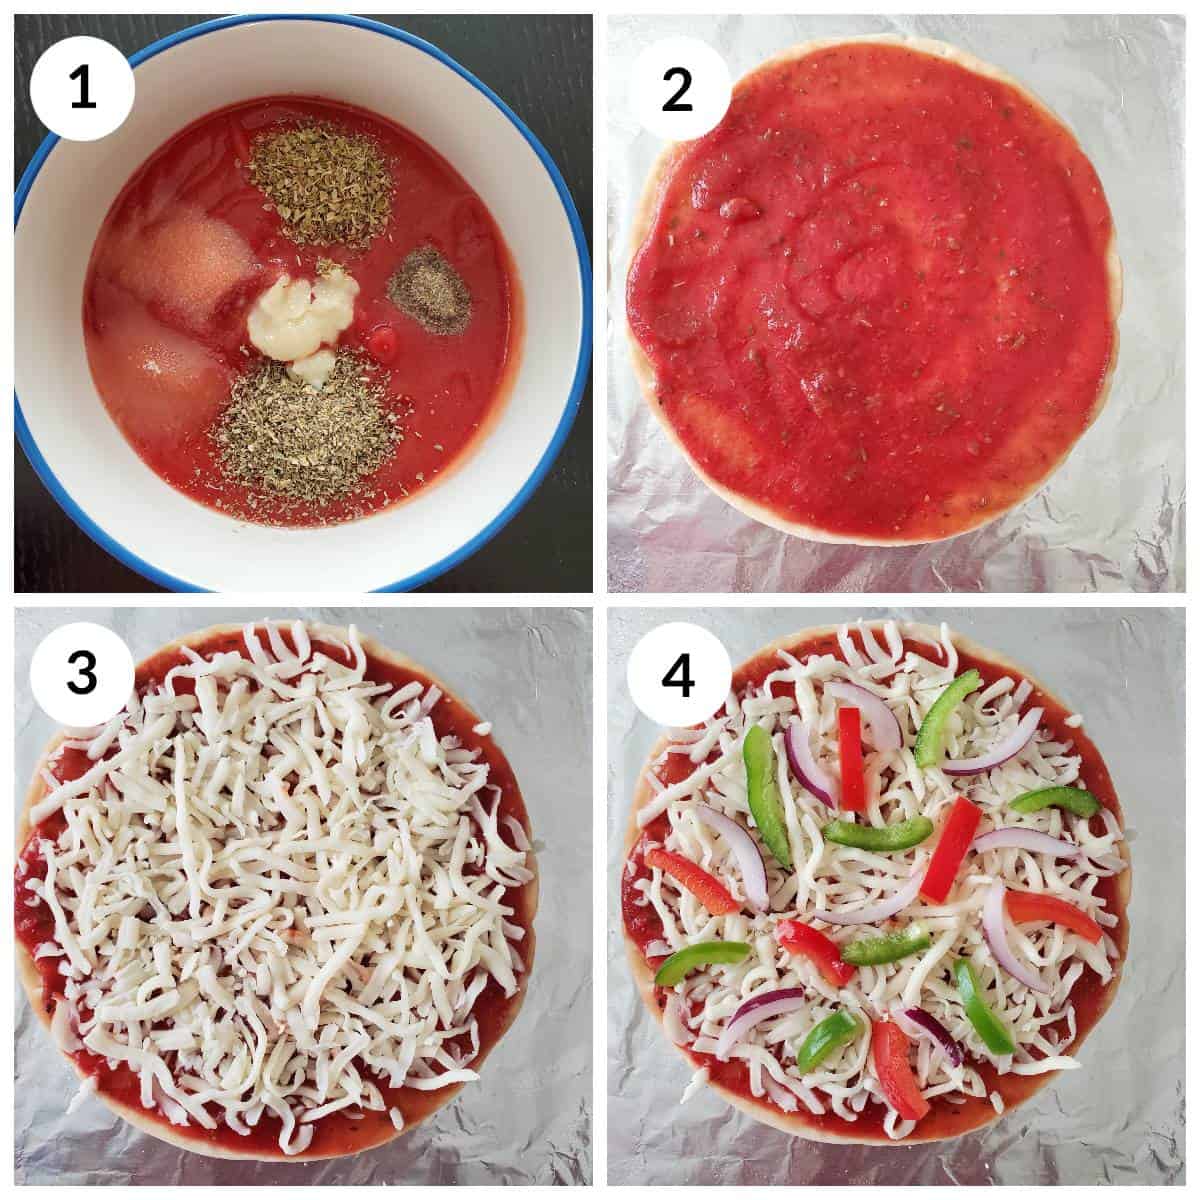 Steps for making pizza sauce and layering the sauce, cheese and veggies for Pita Bread Pizza